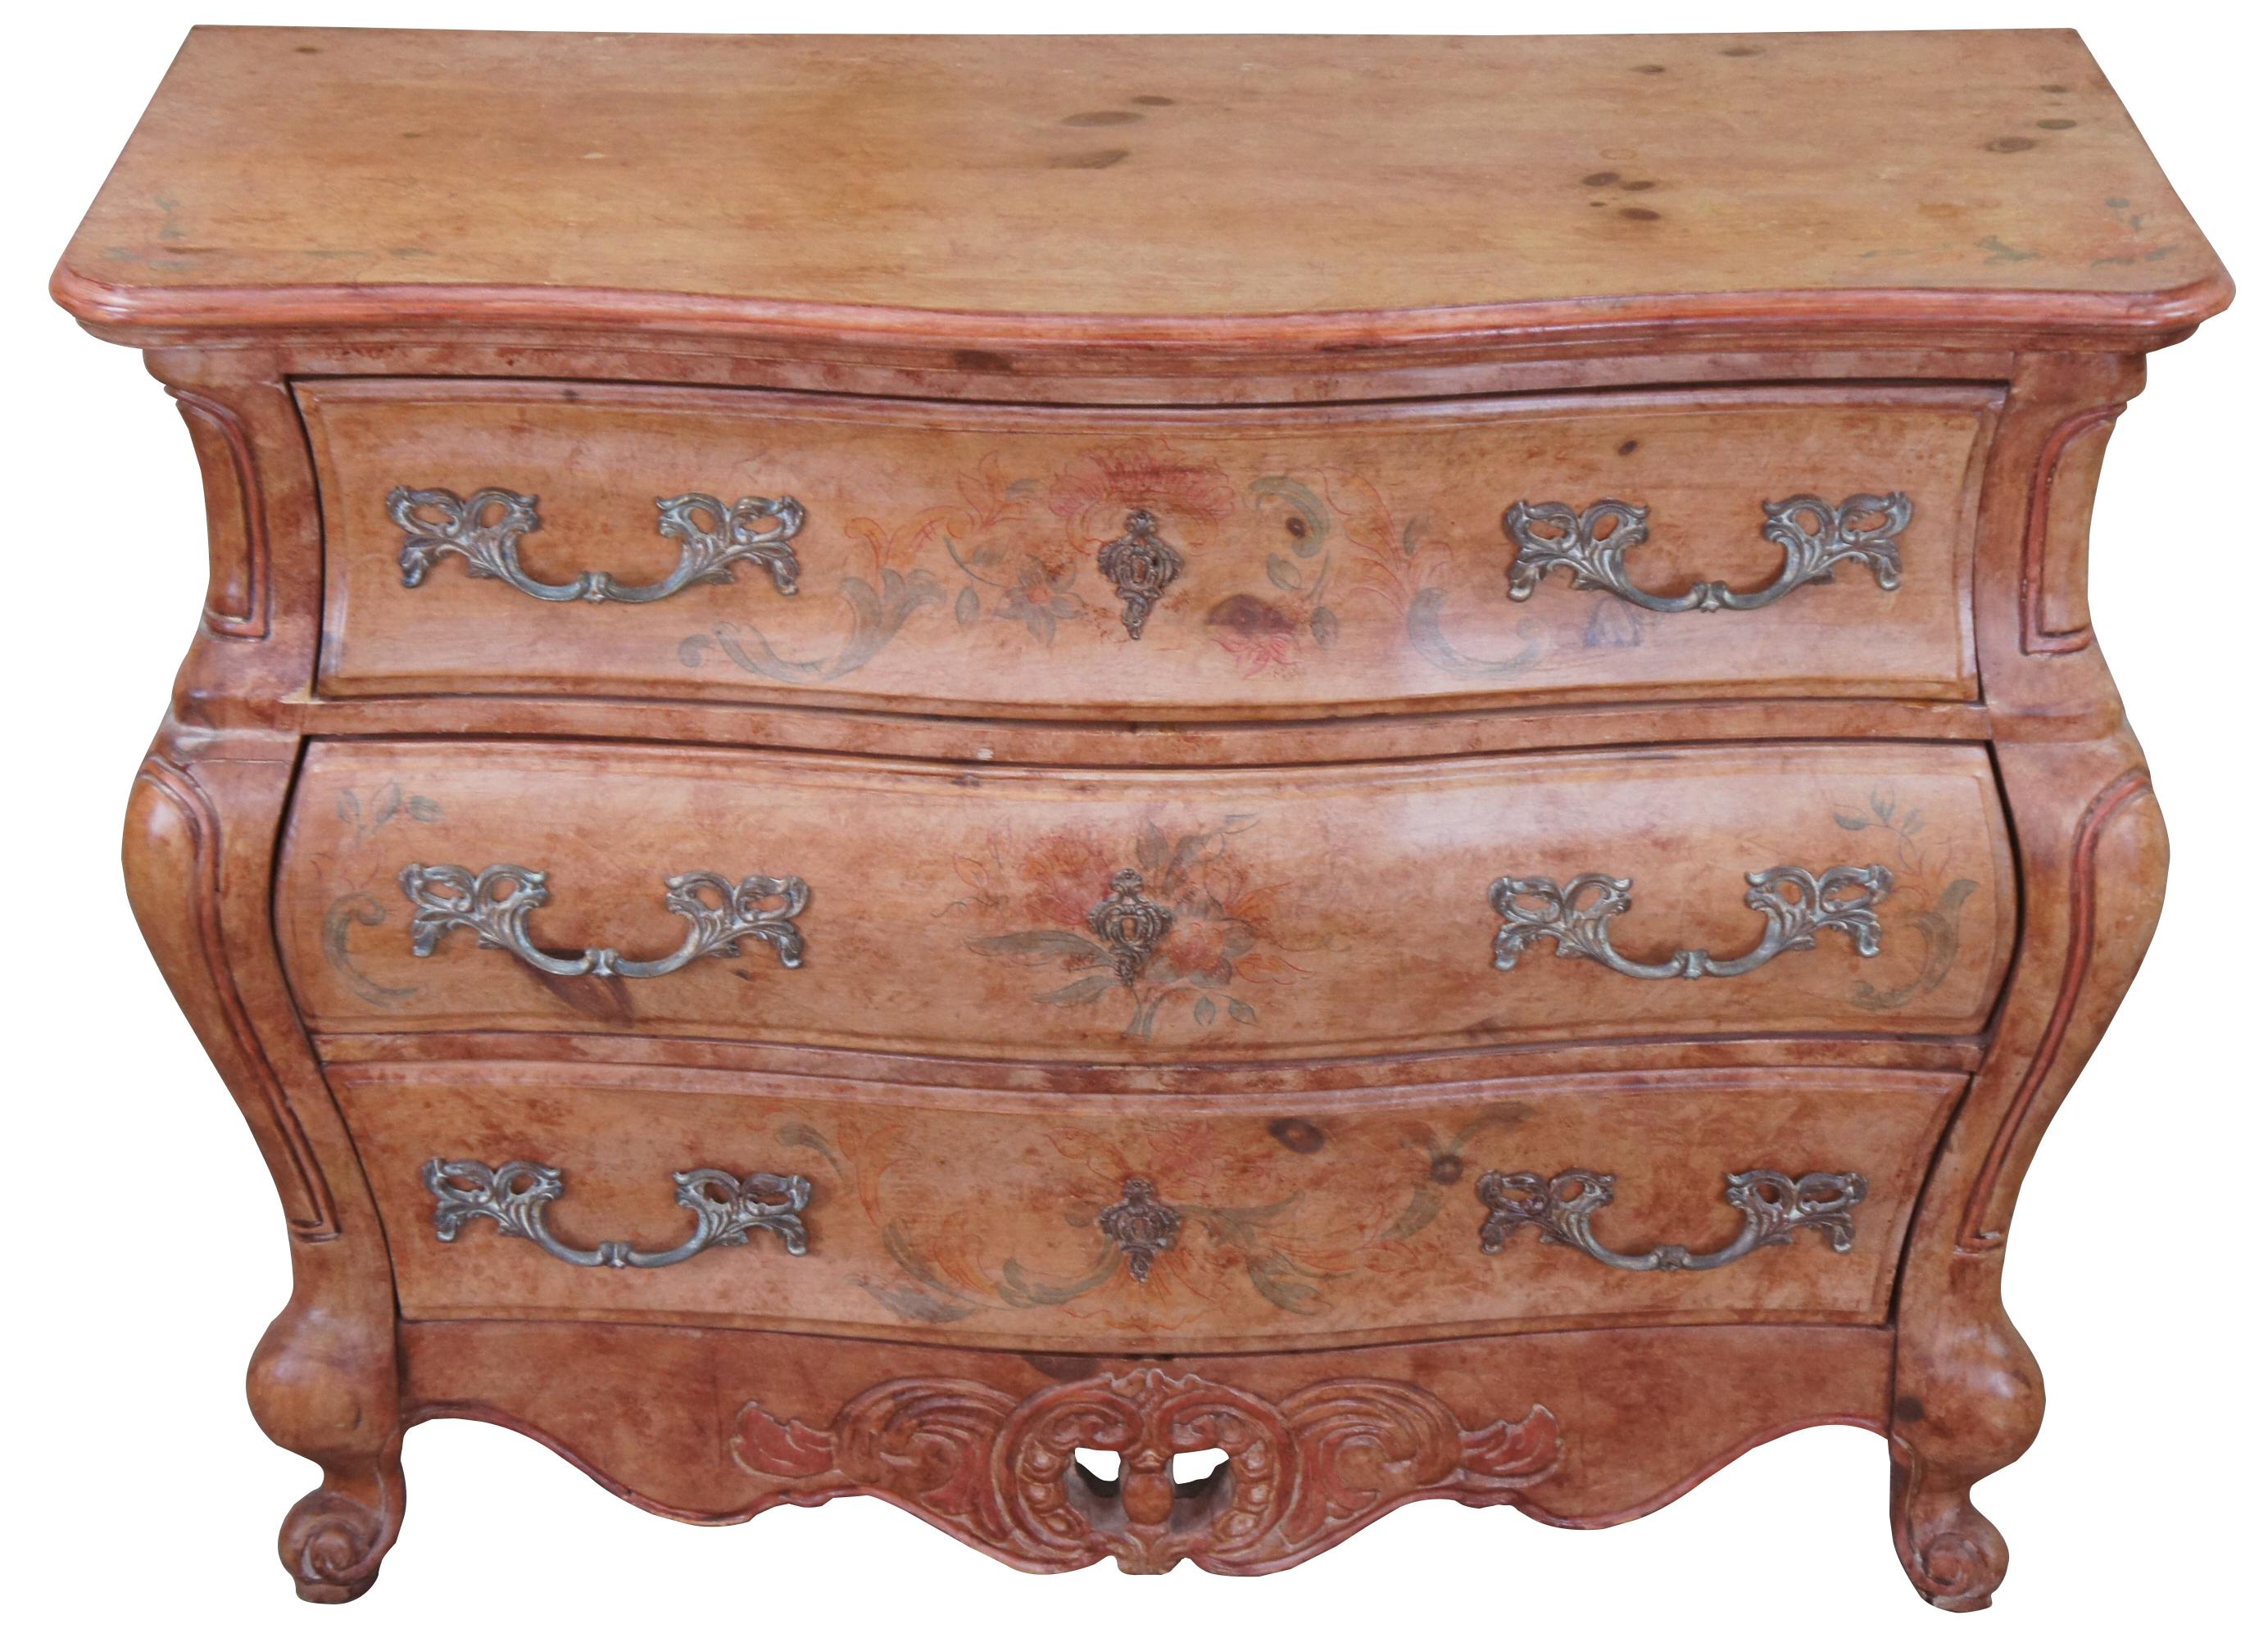 Circa 1970s Pulaski commode. Made from pine with a serpentine front a shapely bombe form. Features dovetailed drawers, floral painted accents and scrolled feet.
  